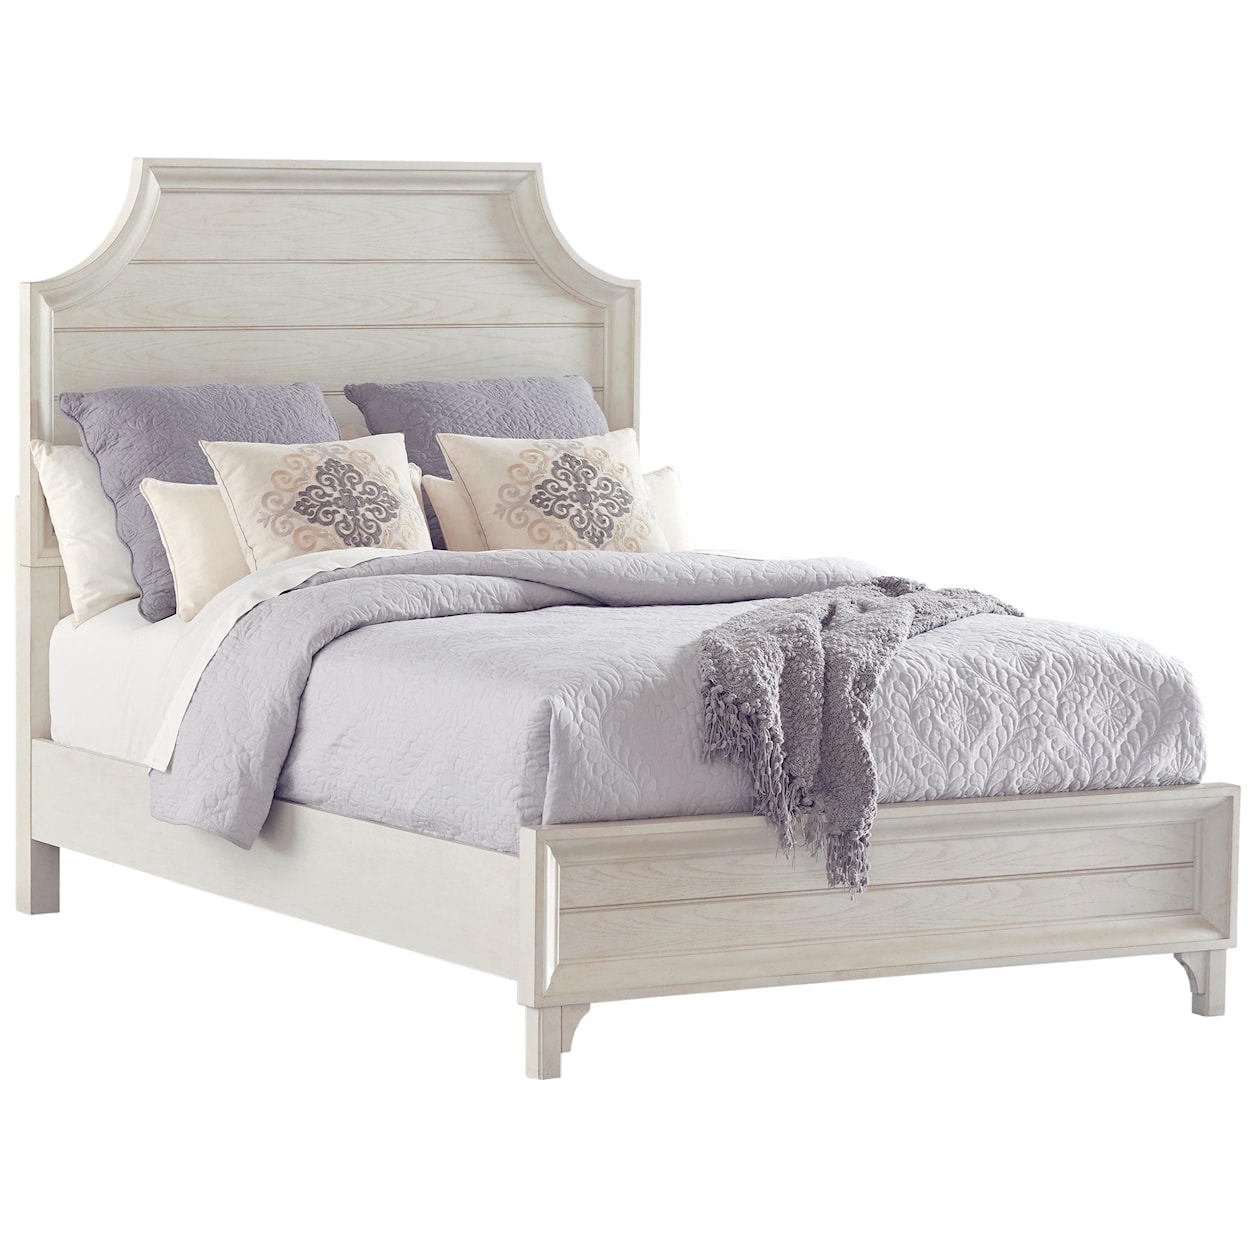 Avalon Furniture Mystic Cay Queen Bed